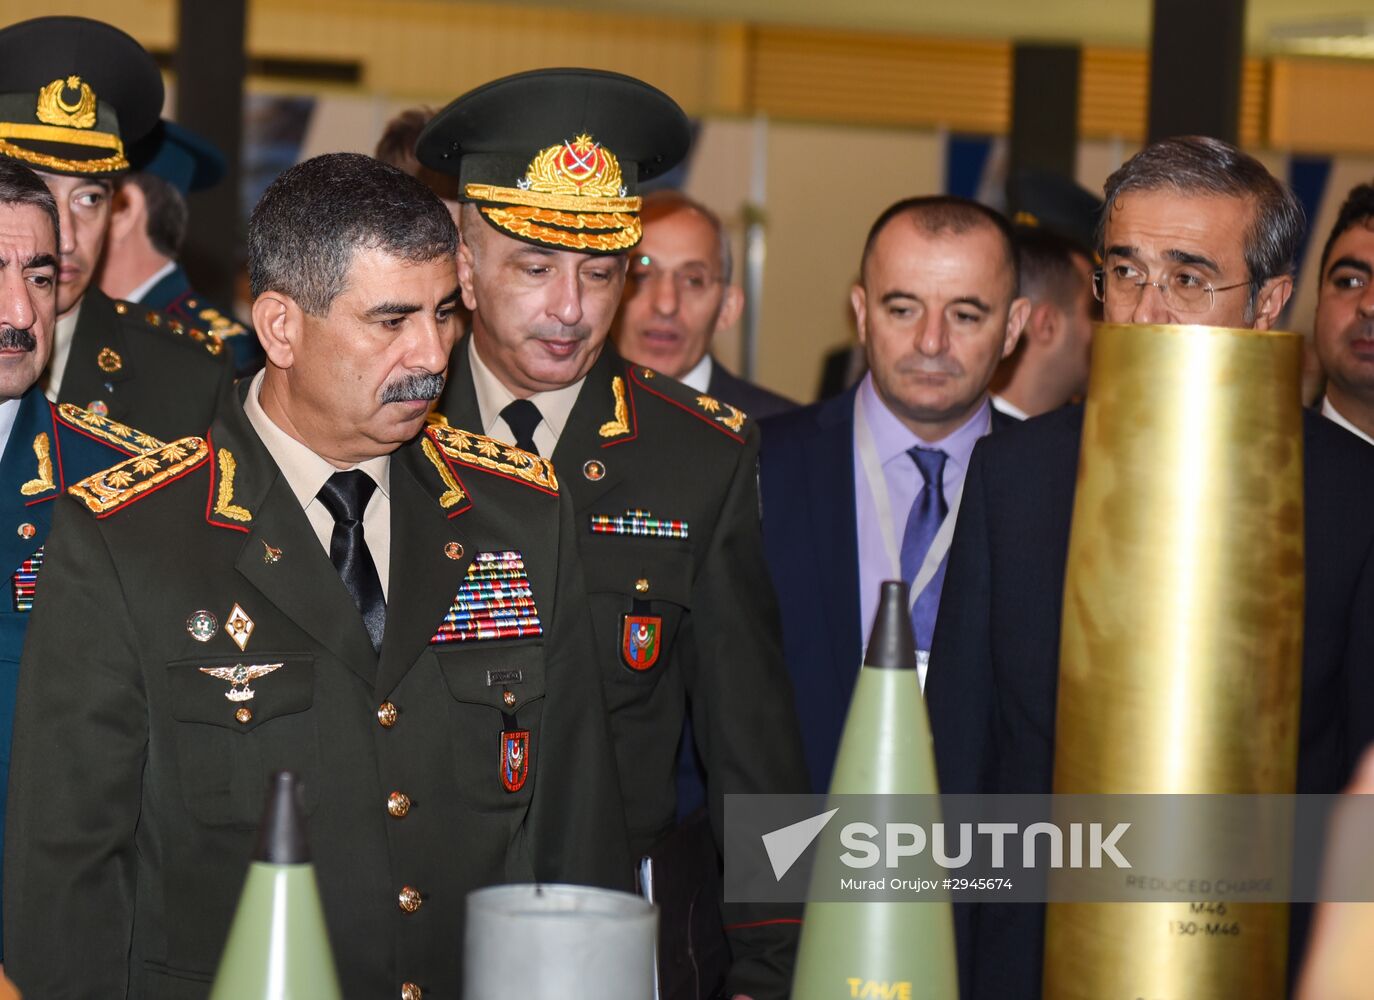 ADEX-2016 arms and military equipment exhibition in Baku